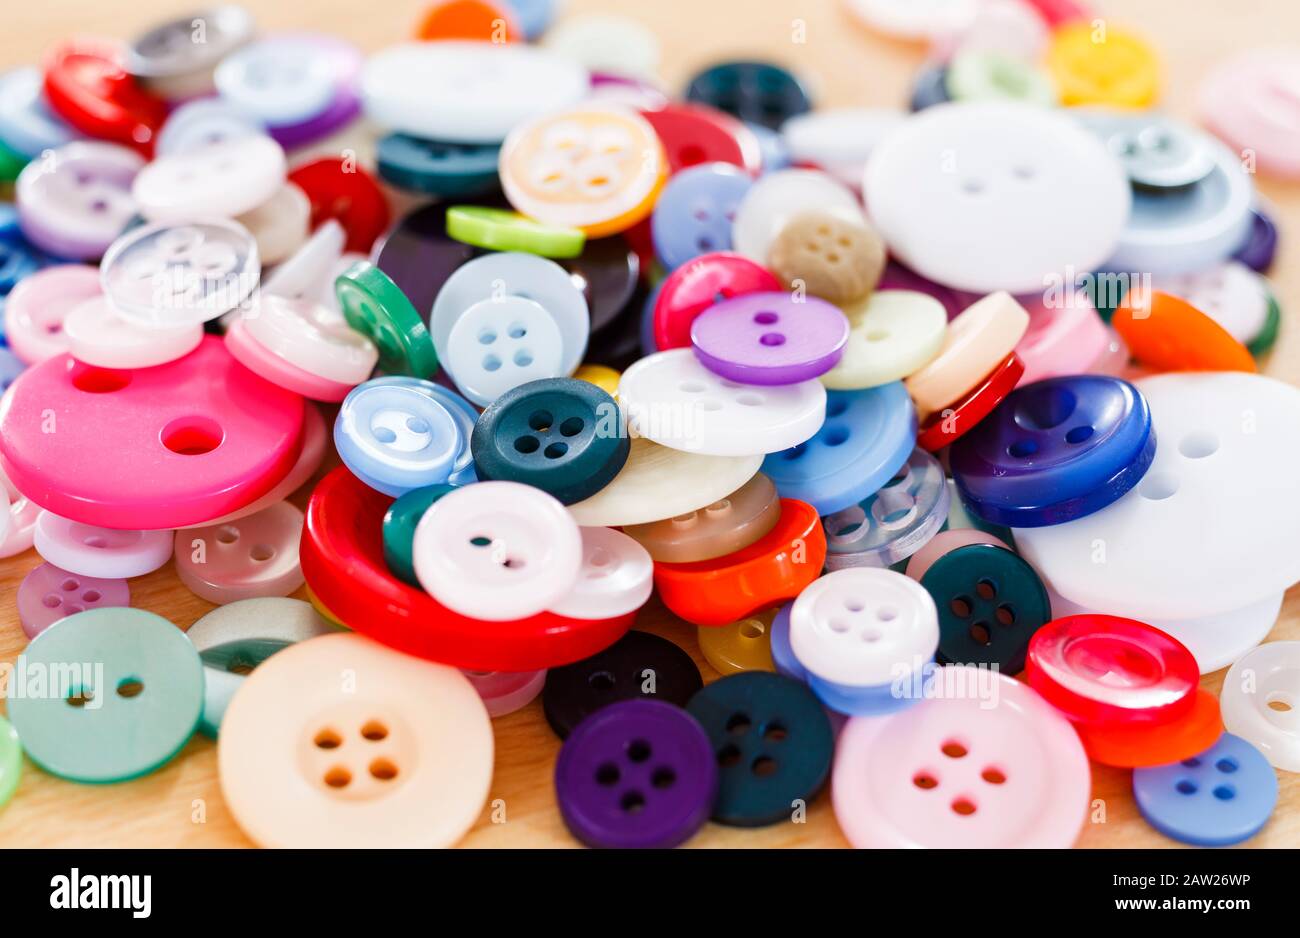 Pile of buttons close up Stock Photo